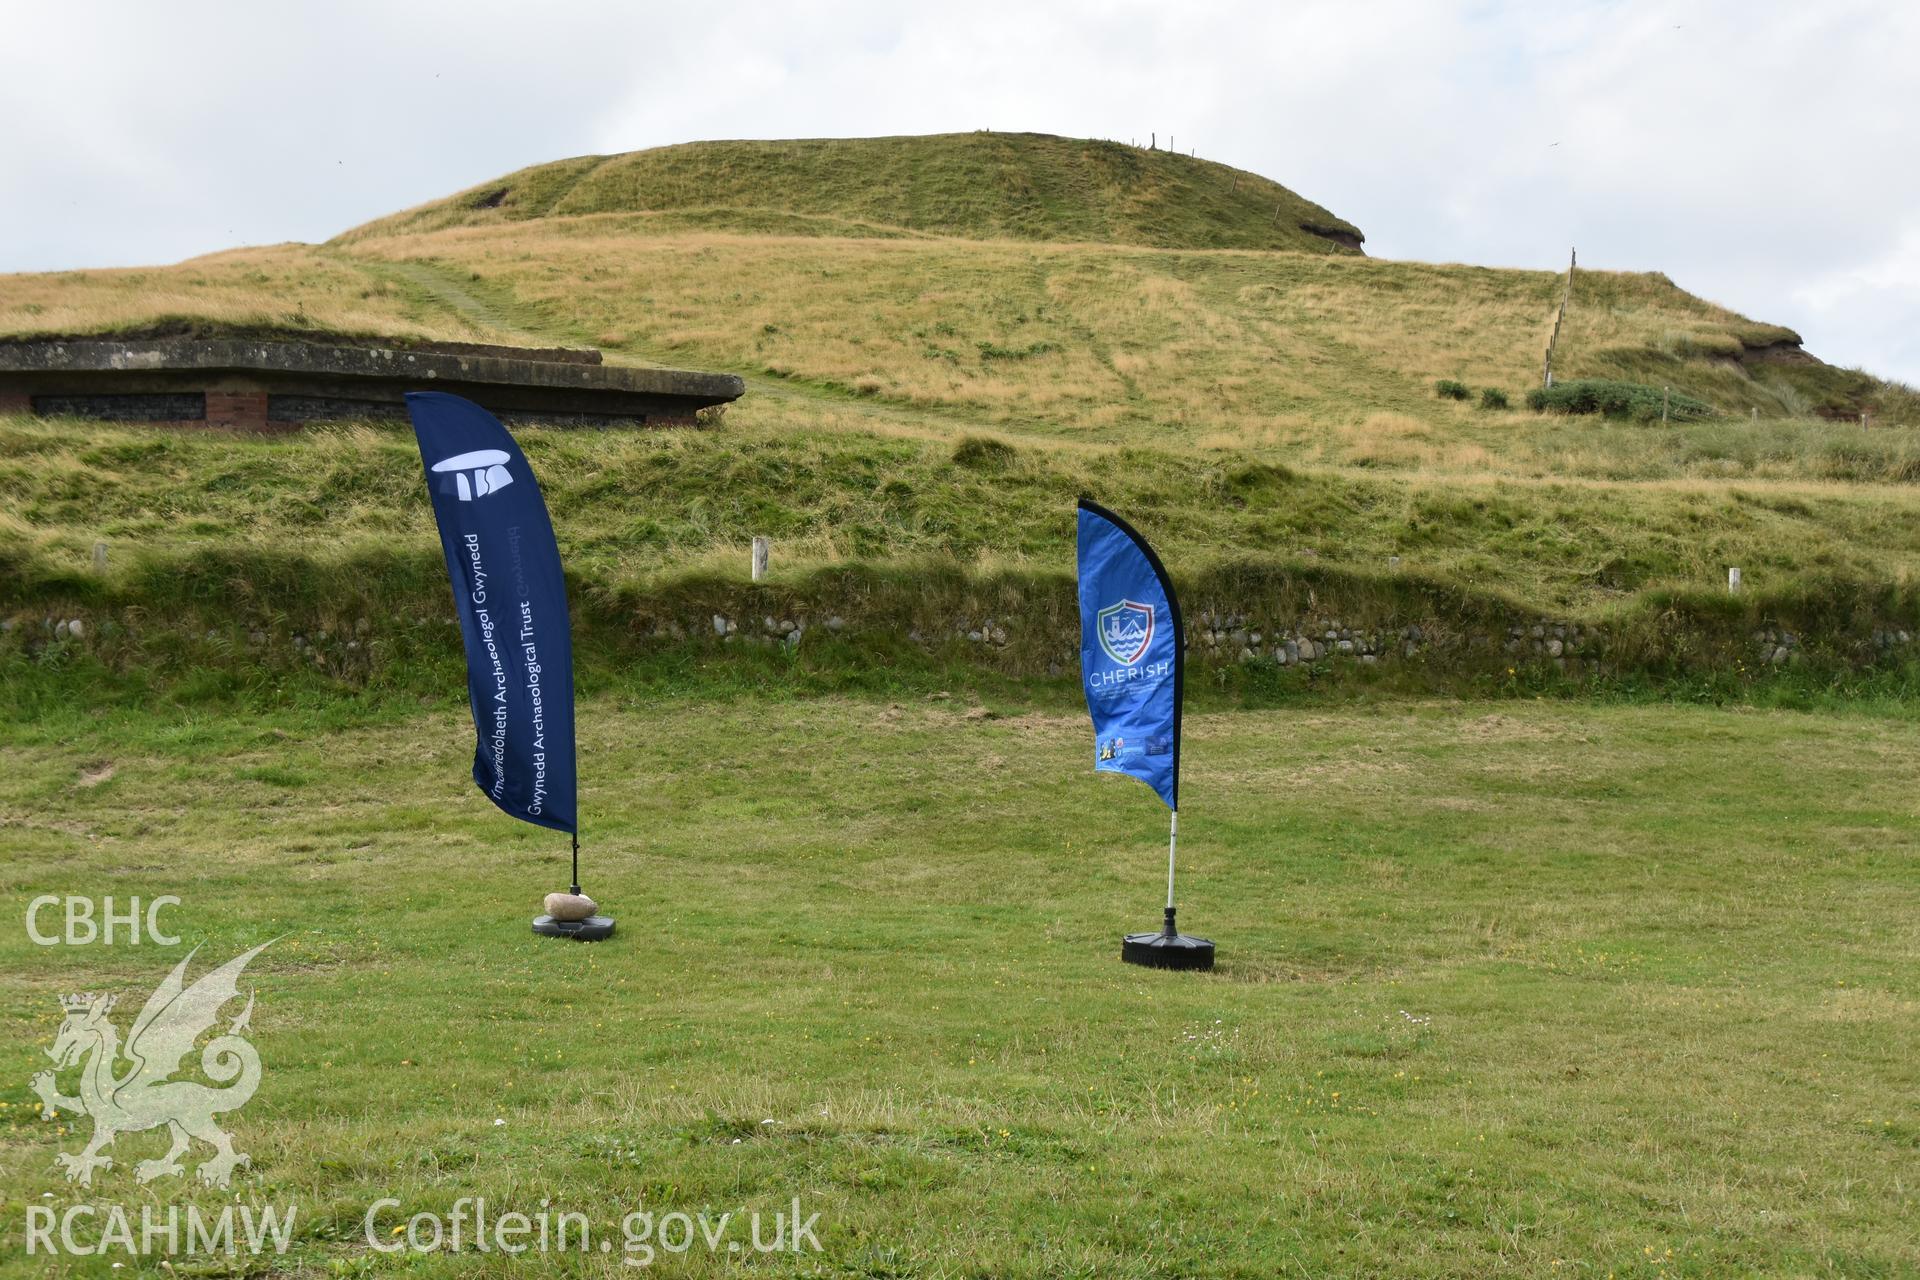 Flags at base of hillfort advertising excavation Taken by Toby Driver. Produced with EU funds through the Ireland Wales Co-operation Programme 2014-2023. All material made freely available through the Open Government Licence.